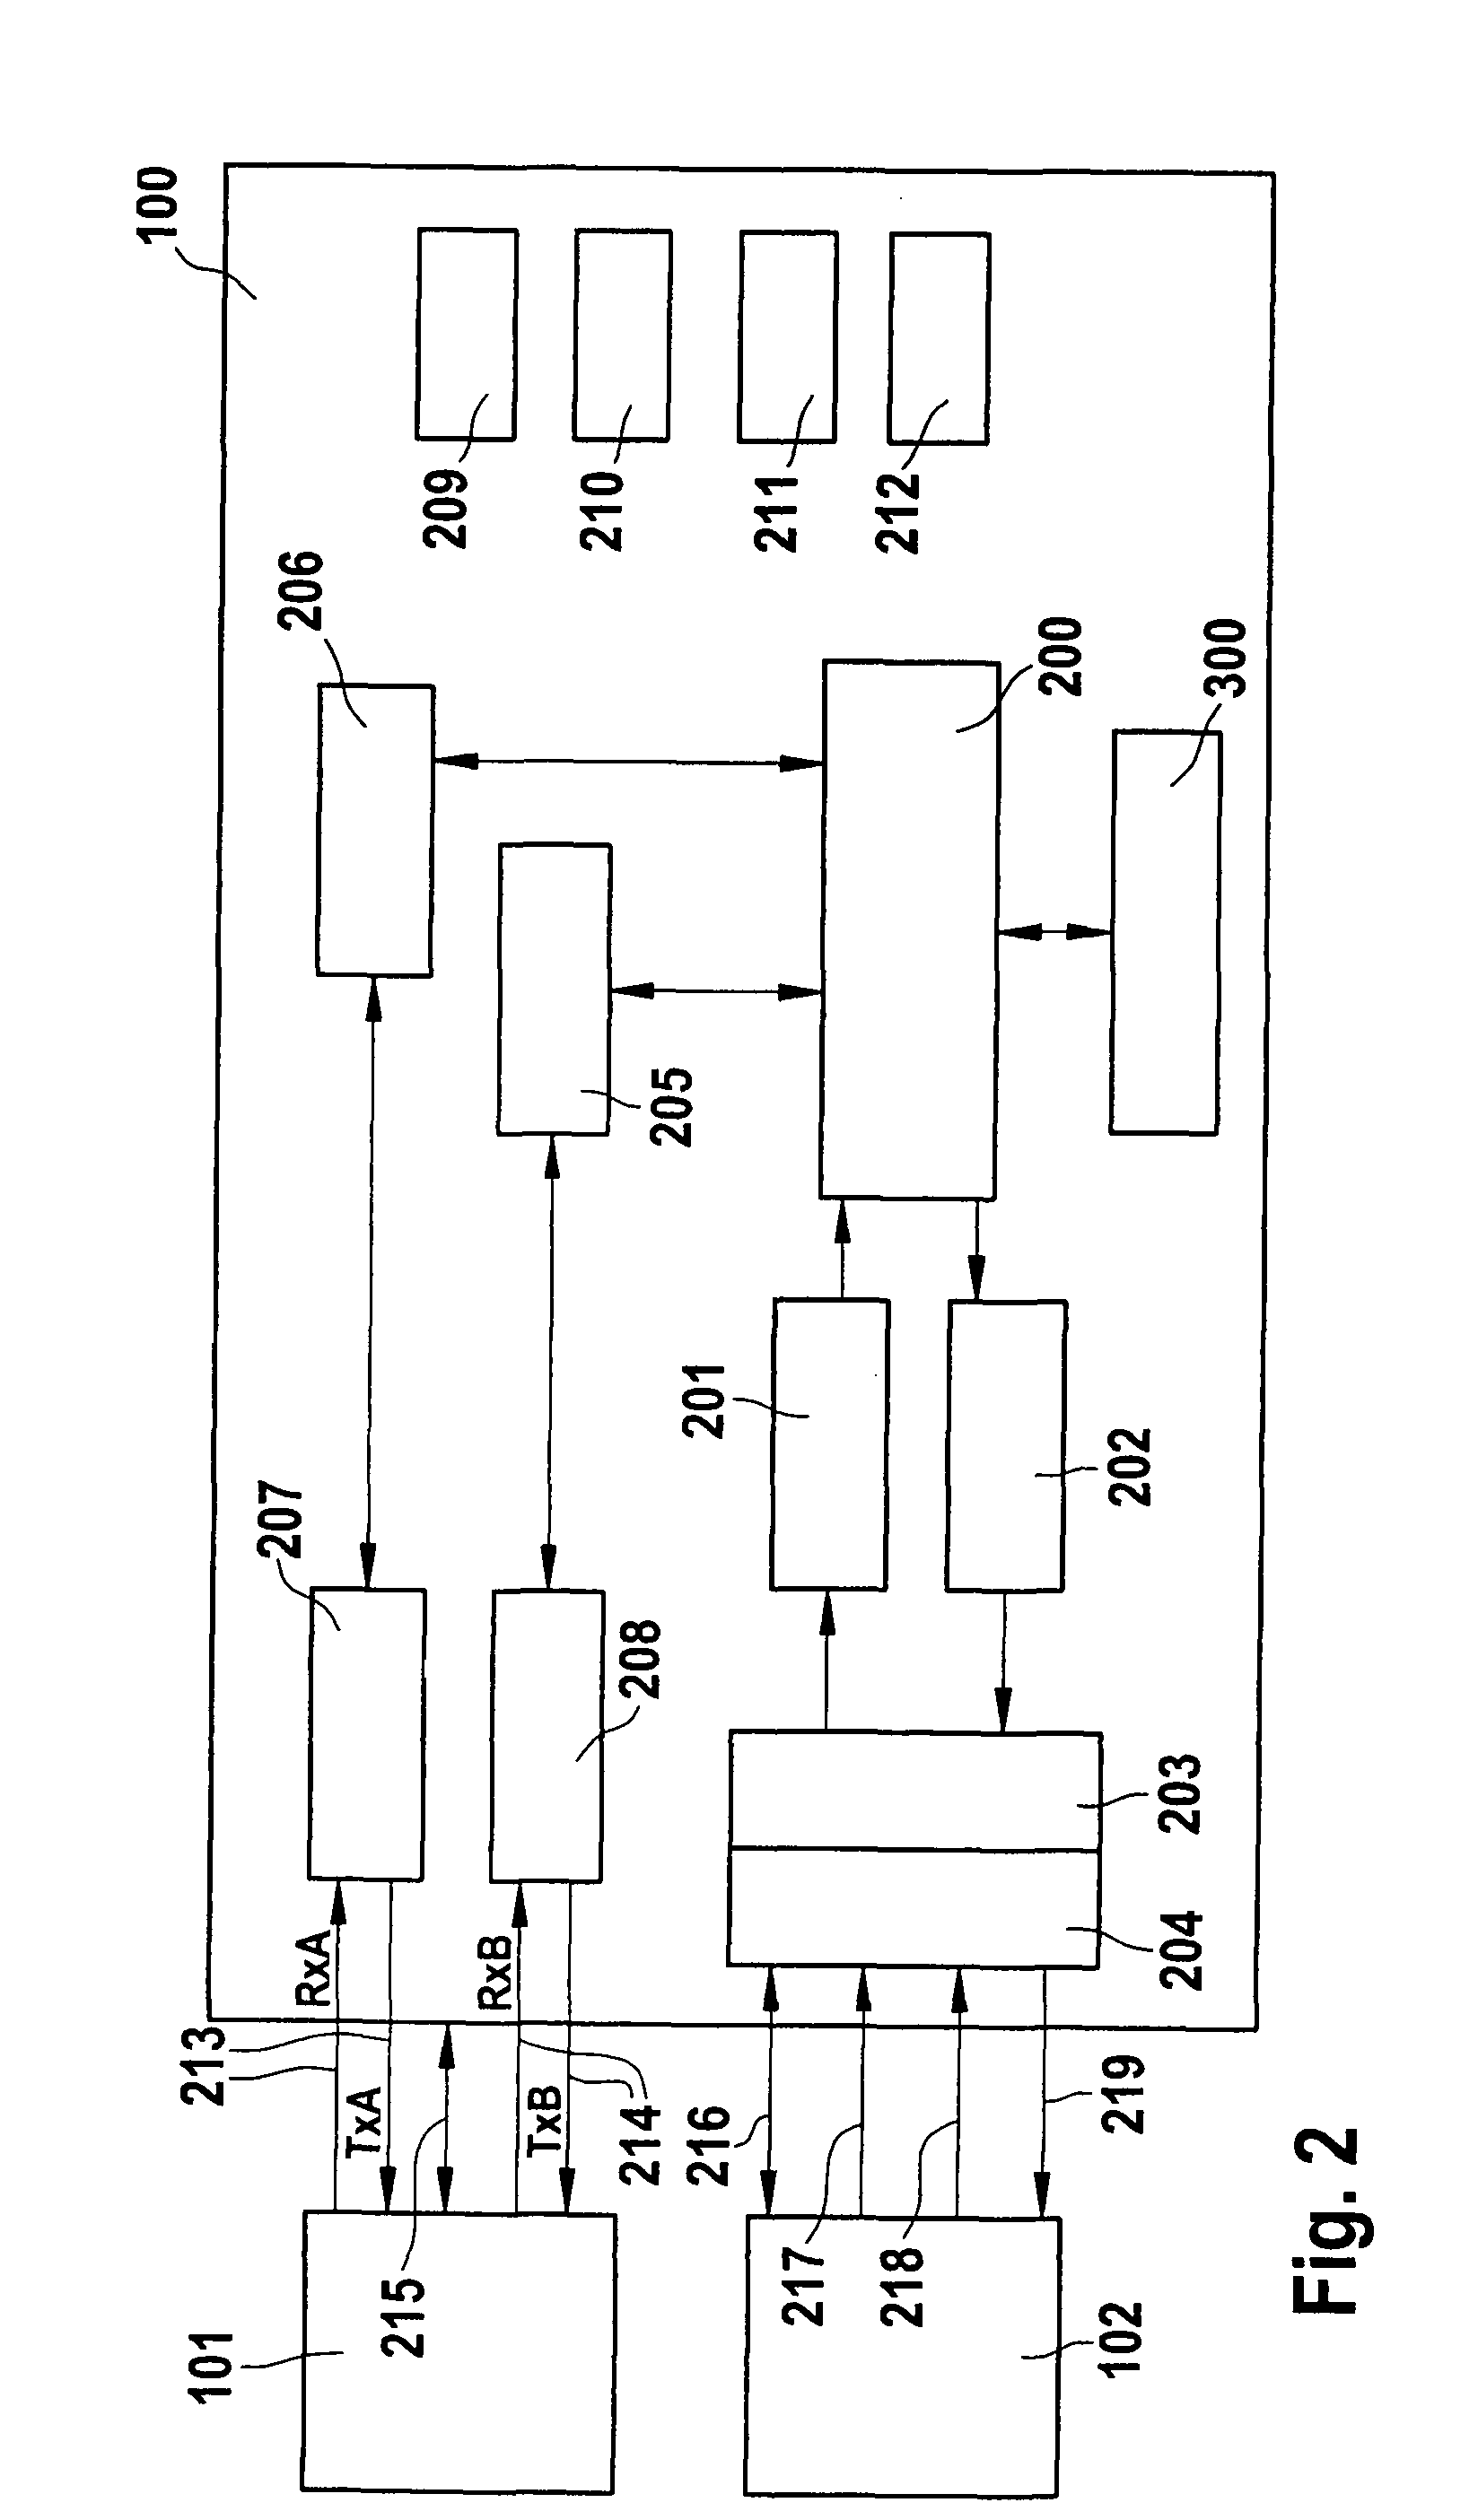 Method and apparatus for accessing data of a message memory of a communication module